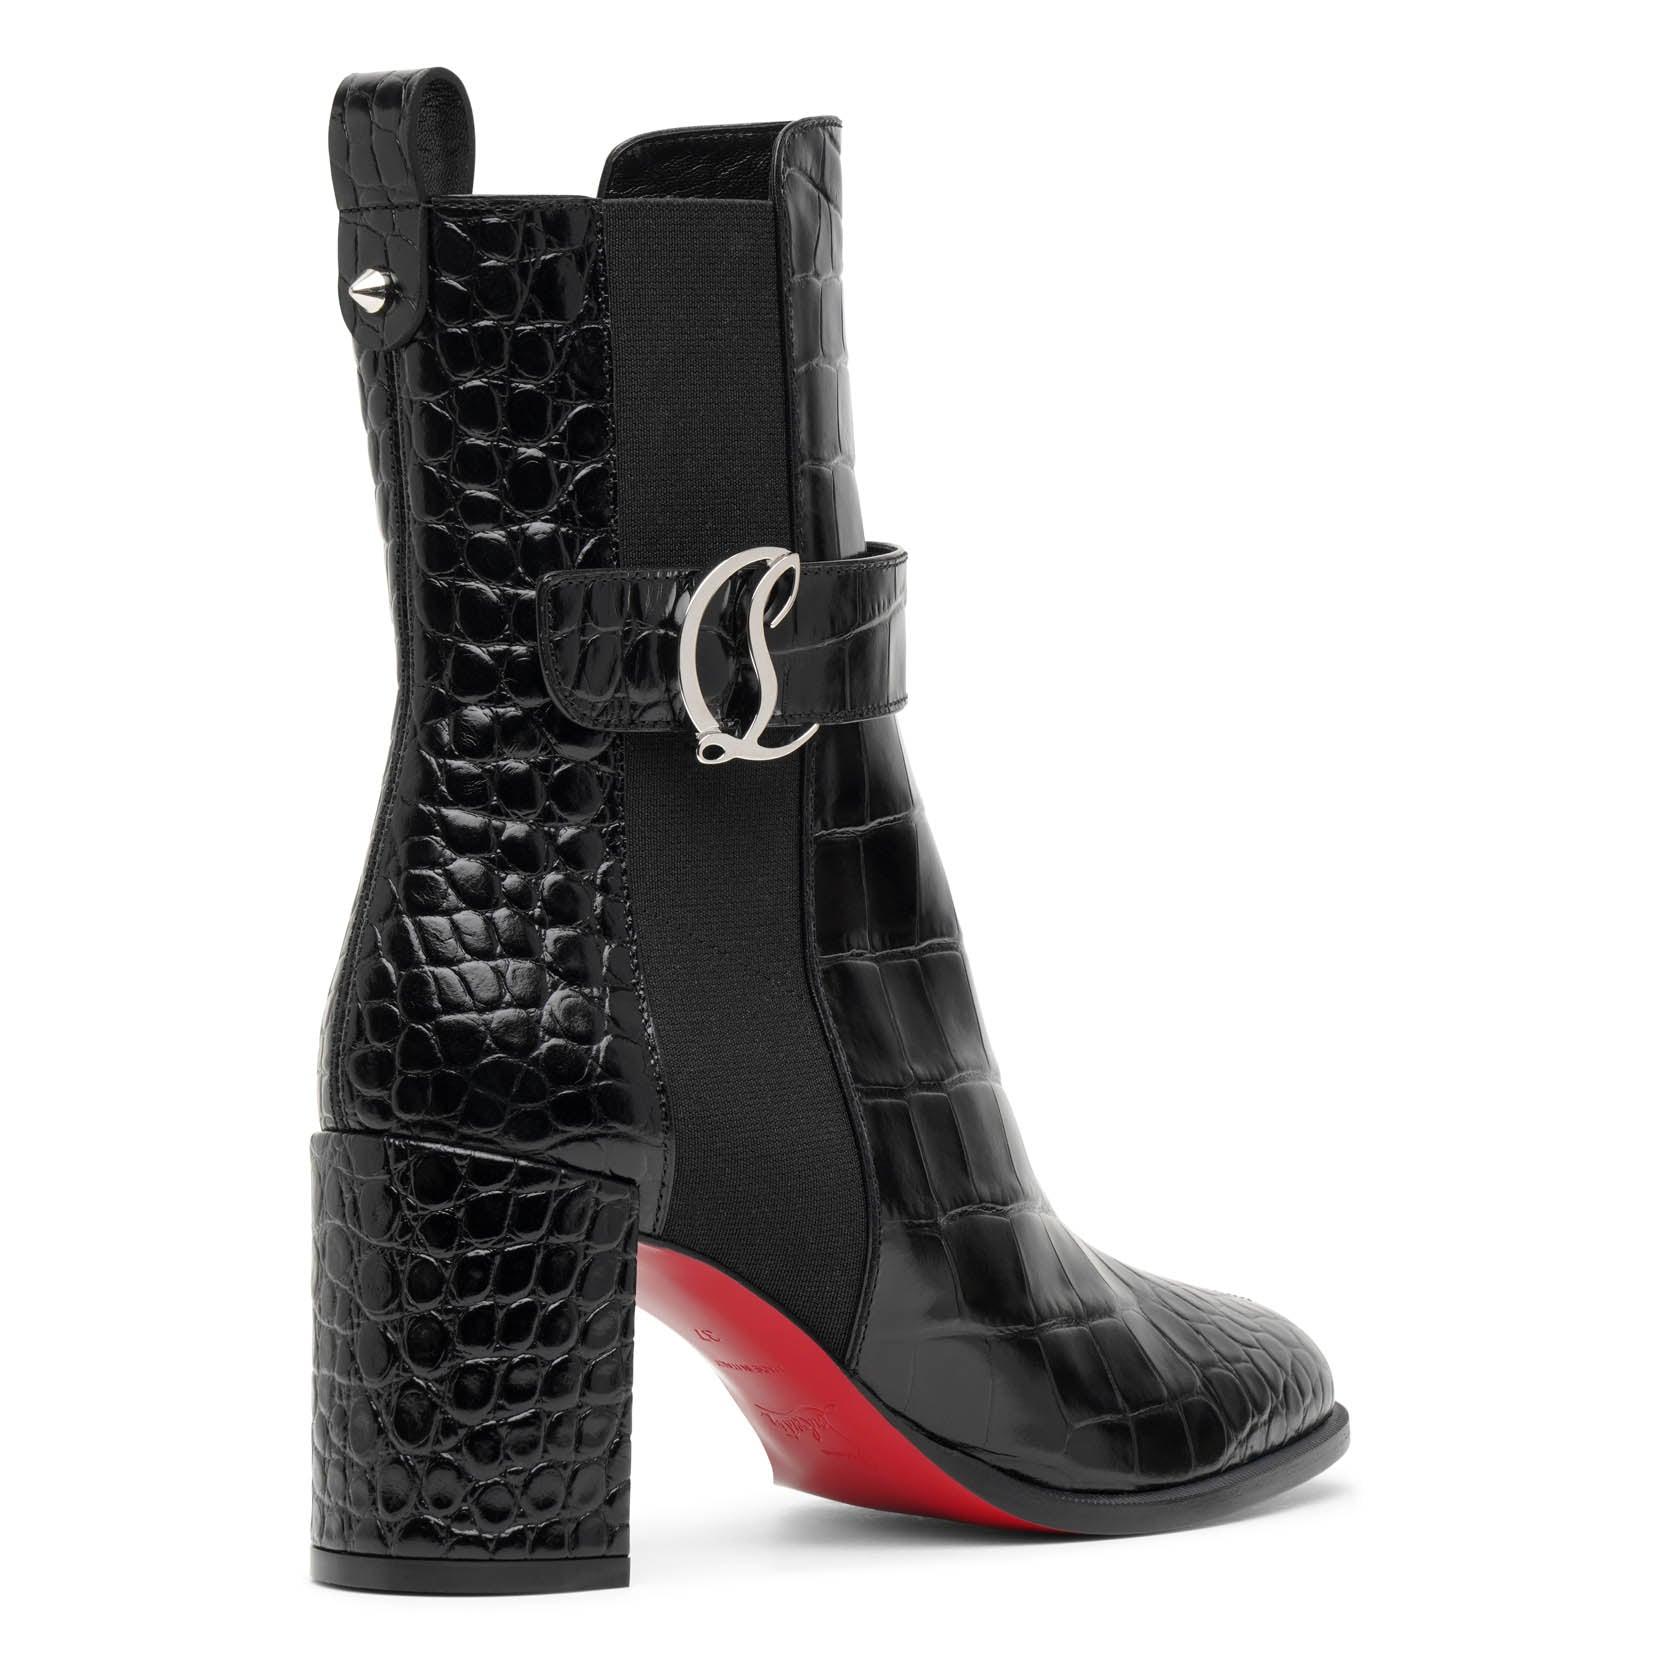 CL Chelsea Booty Leather Boots in Black - Christian Louboutin